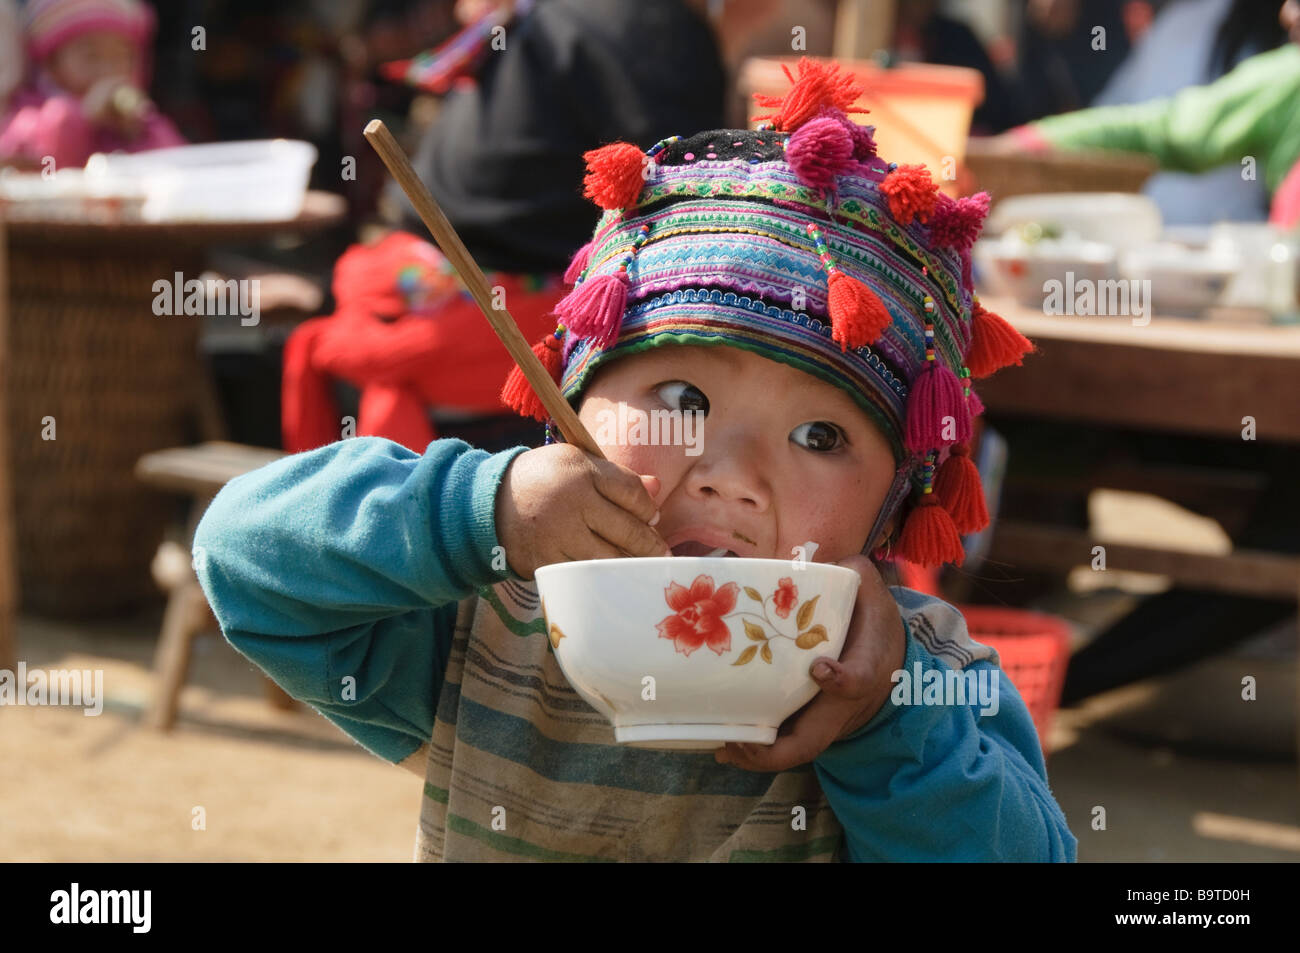 Hmong boy stuffing his face with noodles at market in Tam Duong near Sapa Vietnam Stock Photo